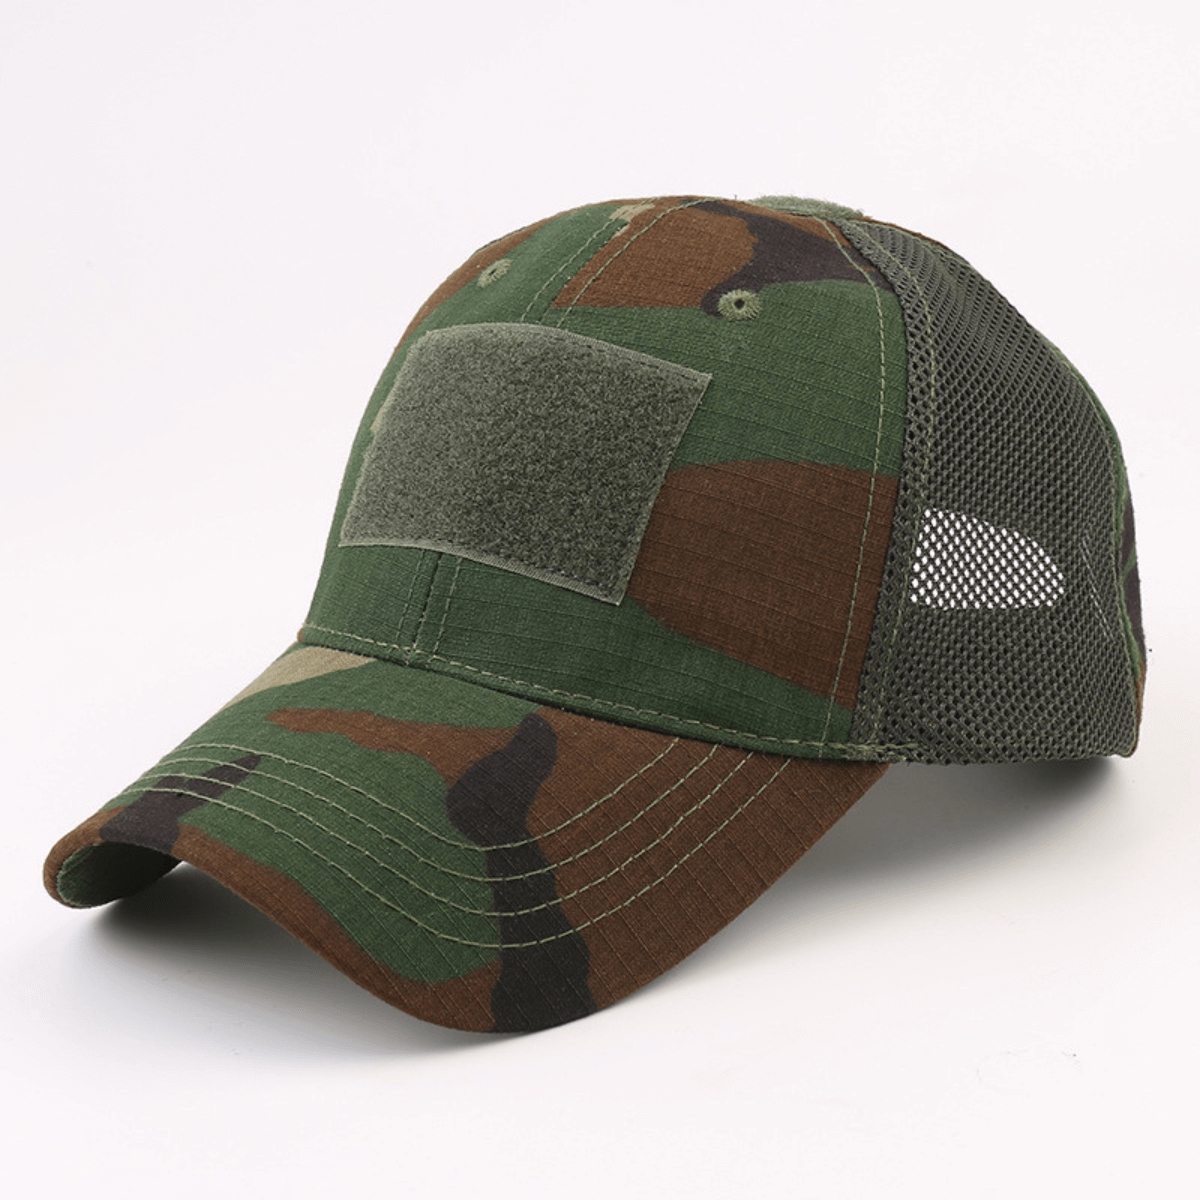 Picture of JupiterGear JG-HAT2-WDLND Military-Style Tactical Patch Hat with Adjustable Strap (JG-HAT2) Woodland